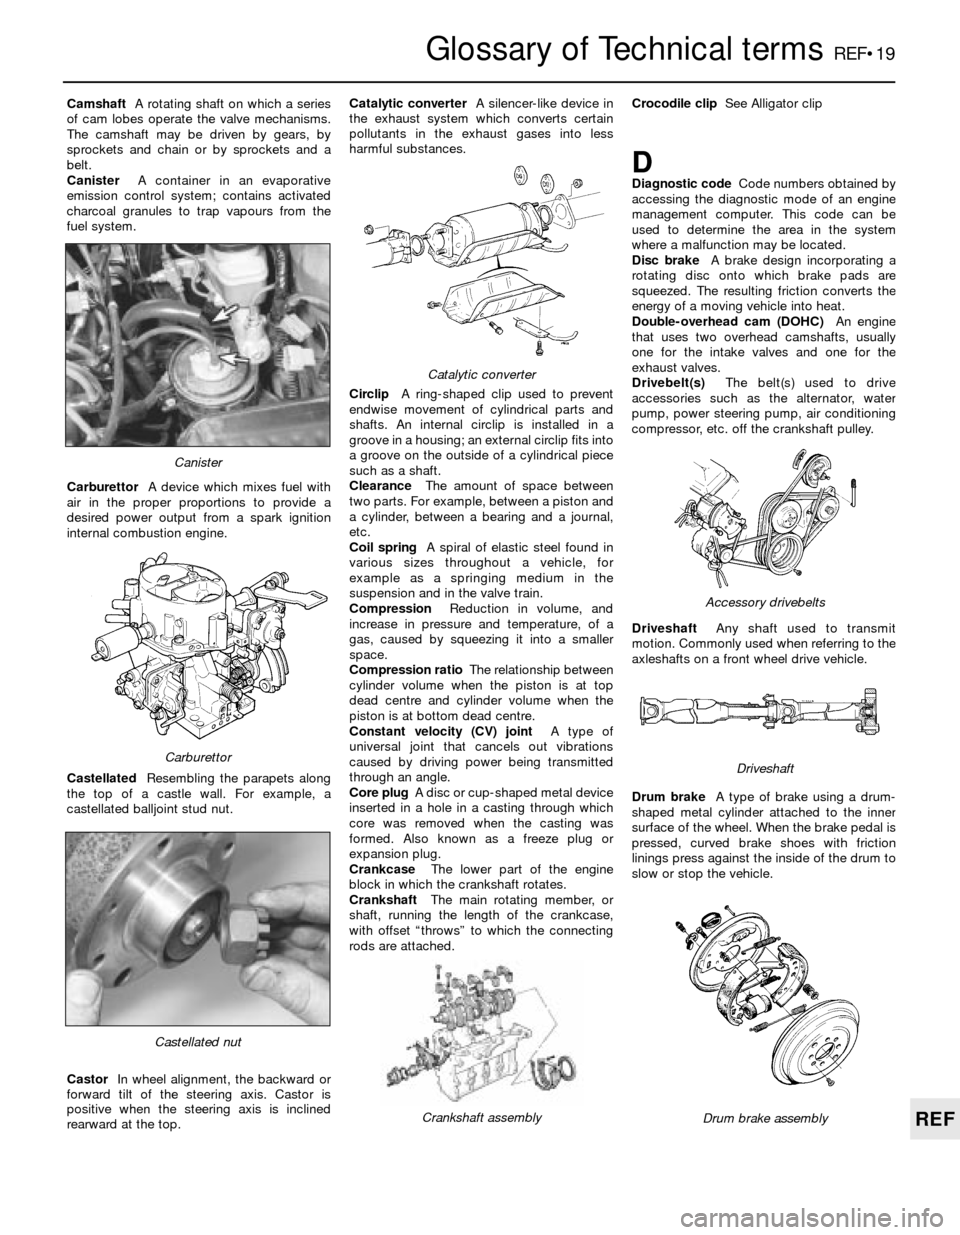 FORD SIERRA 1993 2.G Reference Workshop Manual Glossary of Technical termsREF•19
REF
CamshaftA rotating shaft on which a series
of cam lobes operate the valve mechanisms.
The camshaft may be driven by gears, by
sprockets and chain or by sprocket